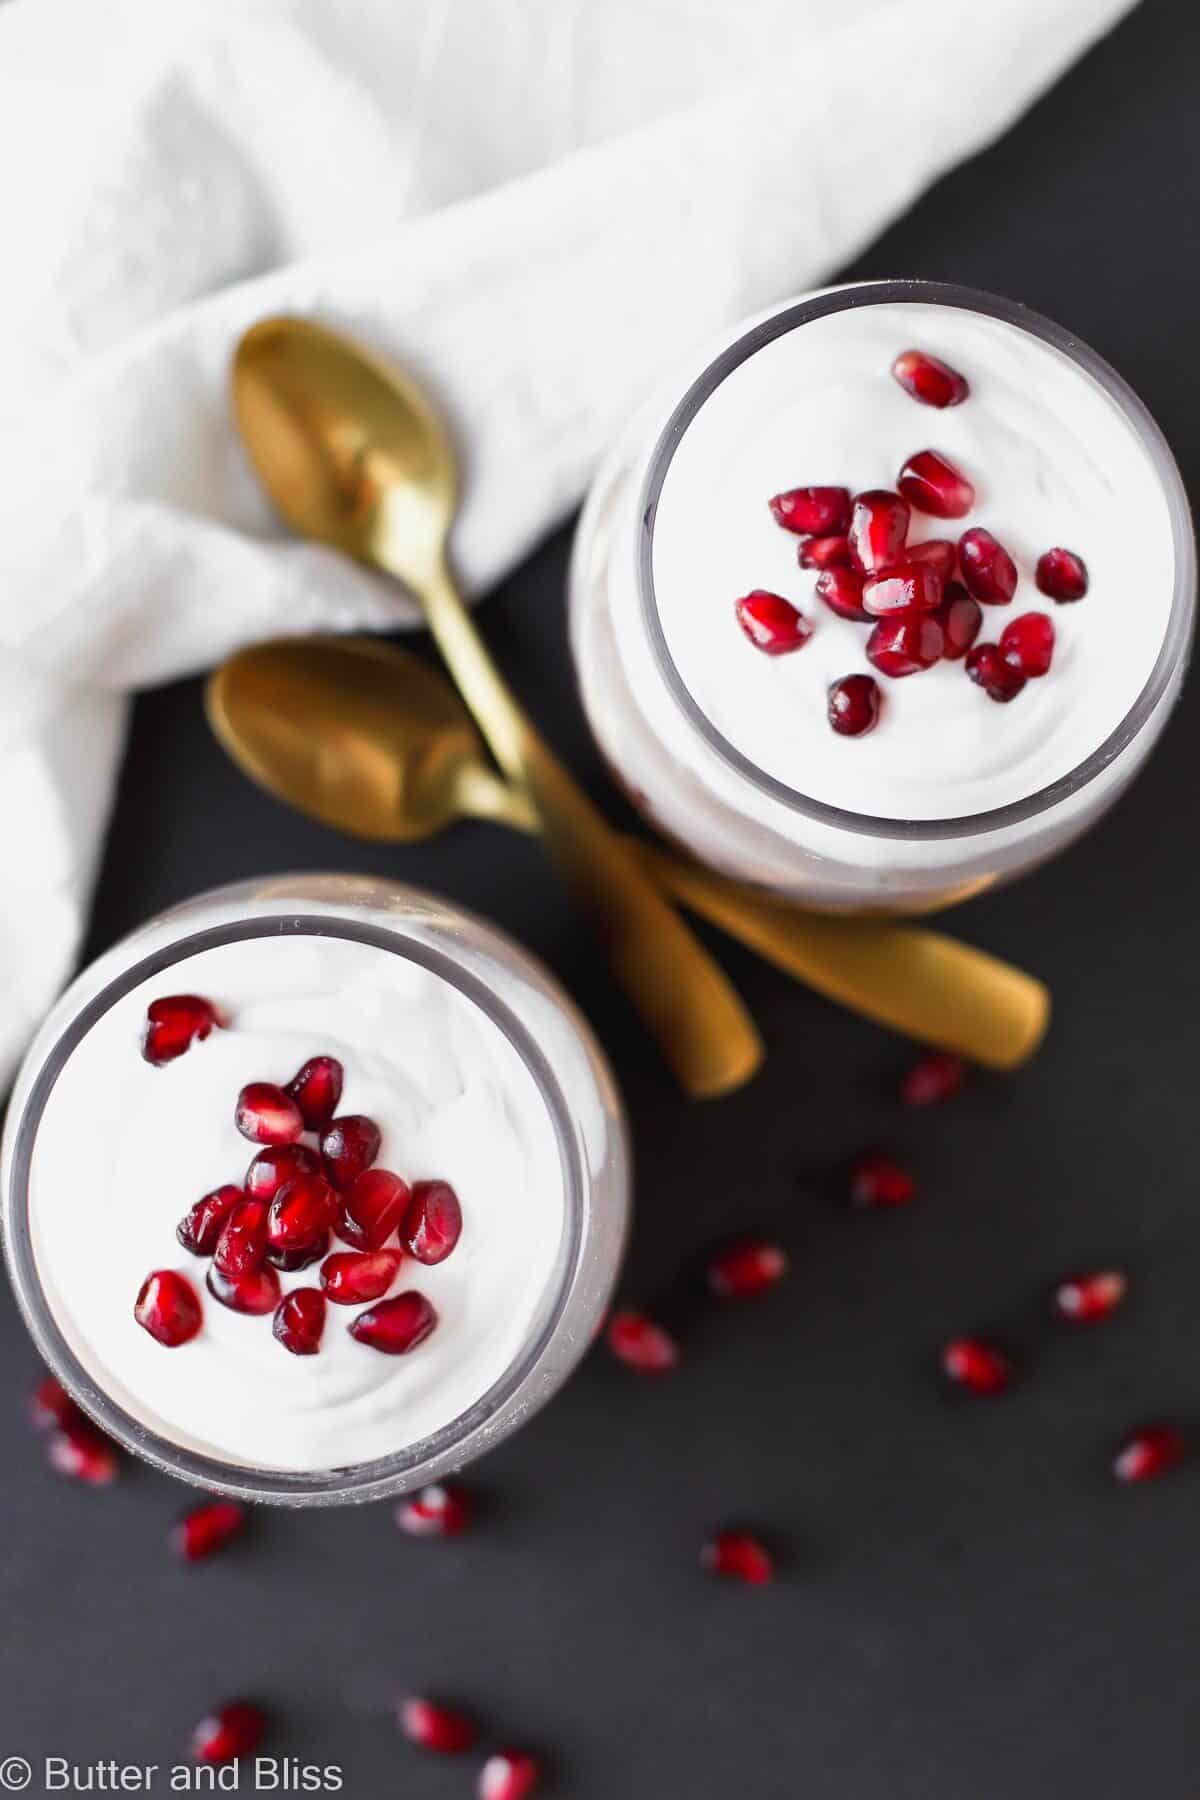 Top view of chia pudding with pomegranate seeds and whipped cream